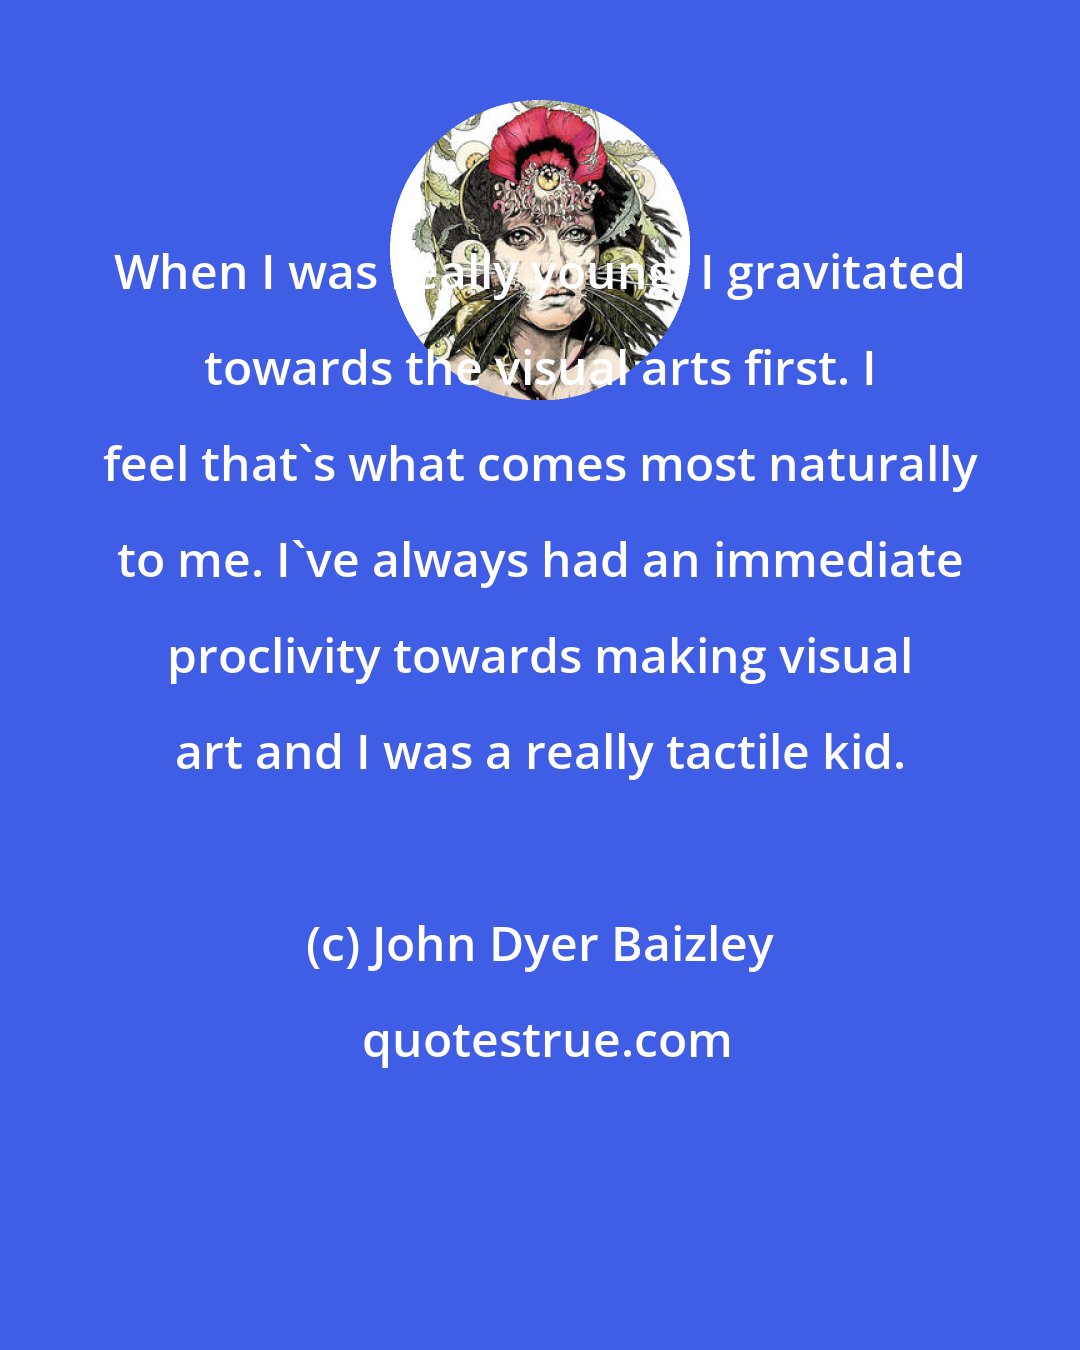 John Dyer Baizley: When I was really young, I gravitated towards the visual arts first. I feel that's what comes most naturally to me. I've always had an immediate proclivity towards making visual art and I was a really tactile kid.